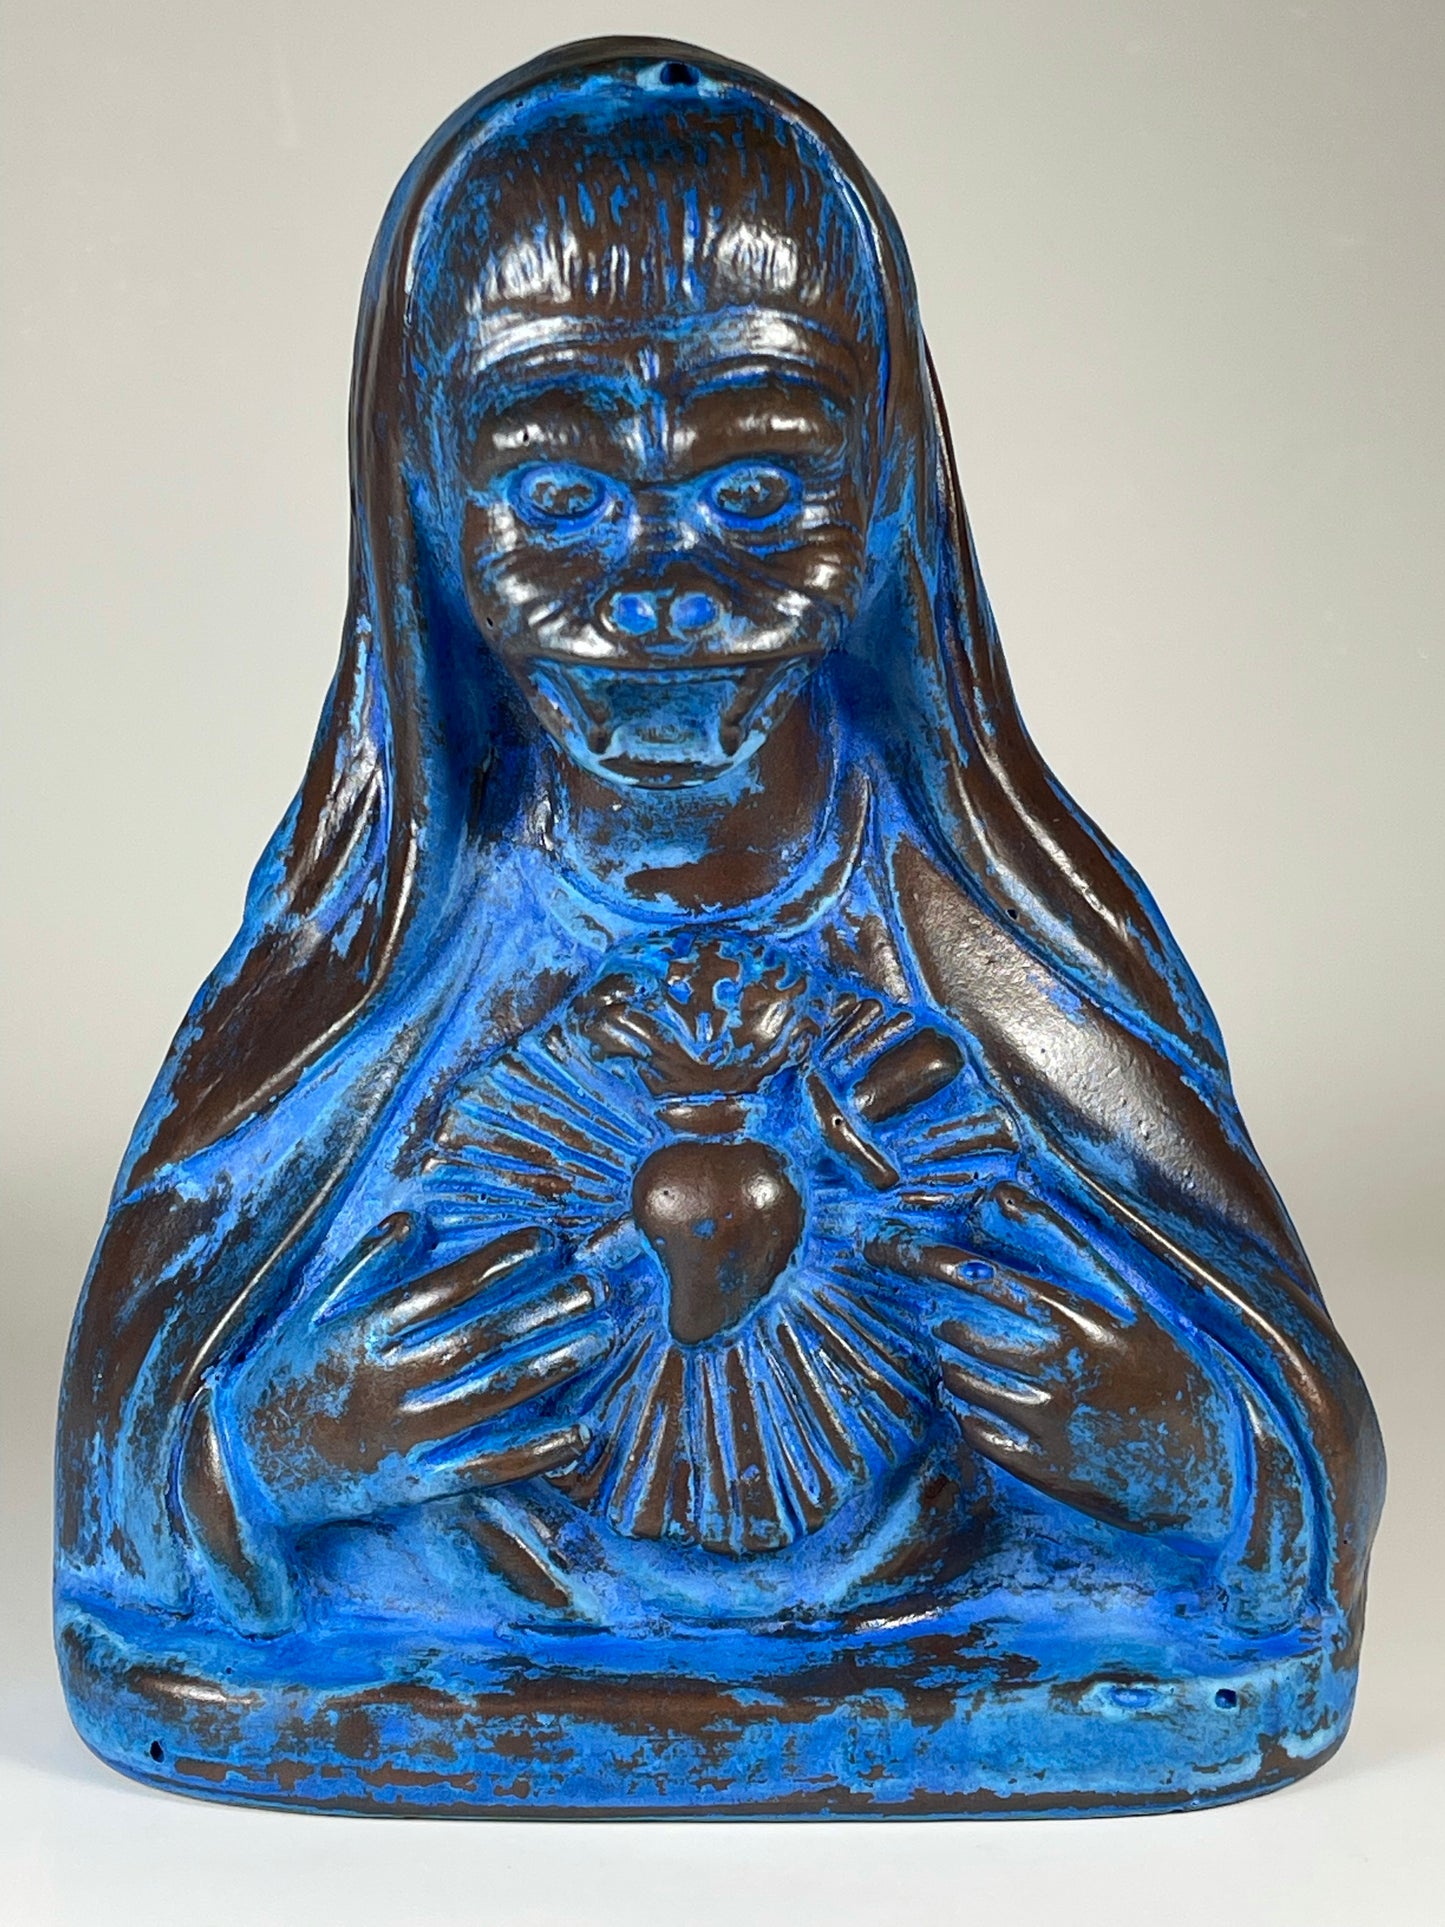 Sacred Heart of the Ape: Cold Cast Copper with Blue Patina